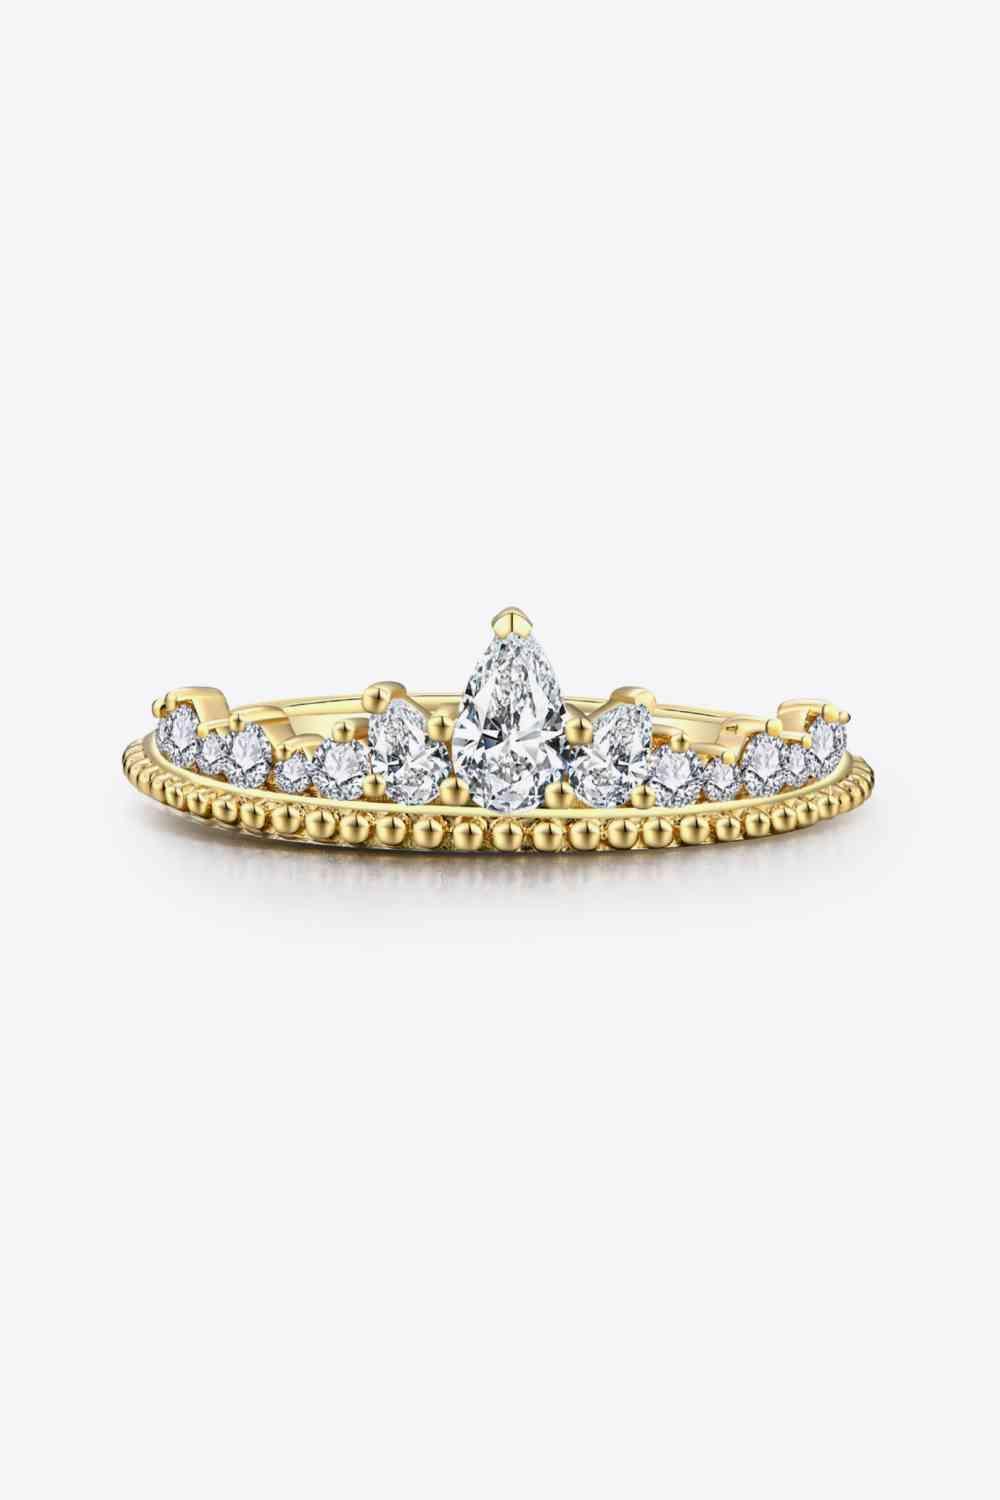 a yellow gold wedding ring set with a pear shaped diamond